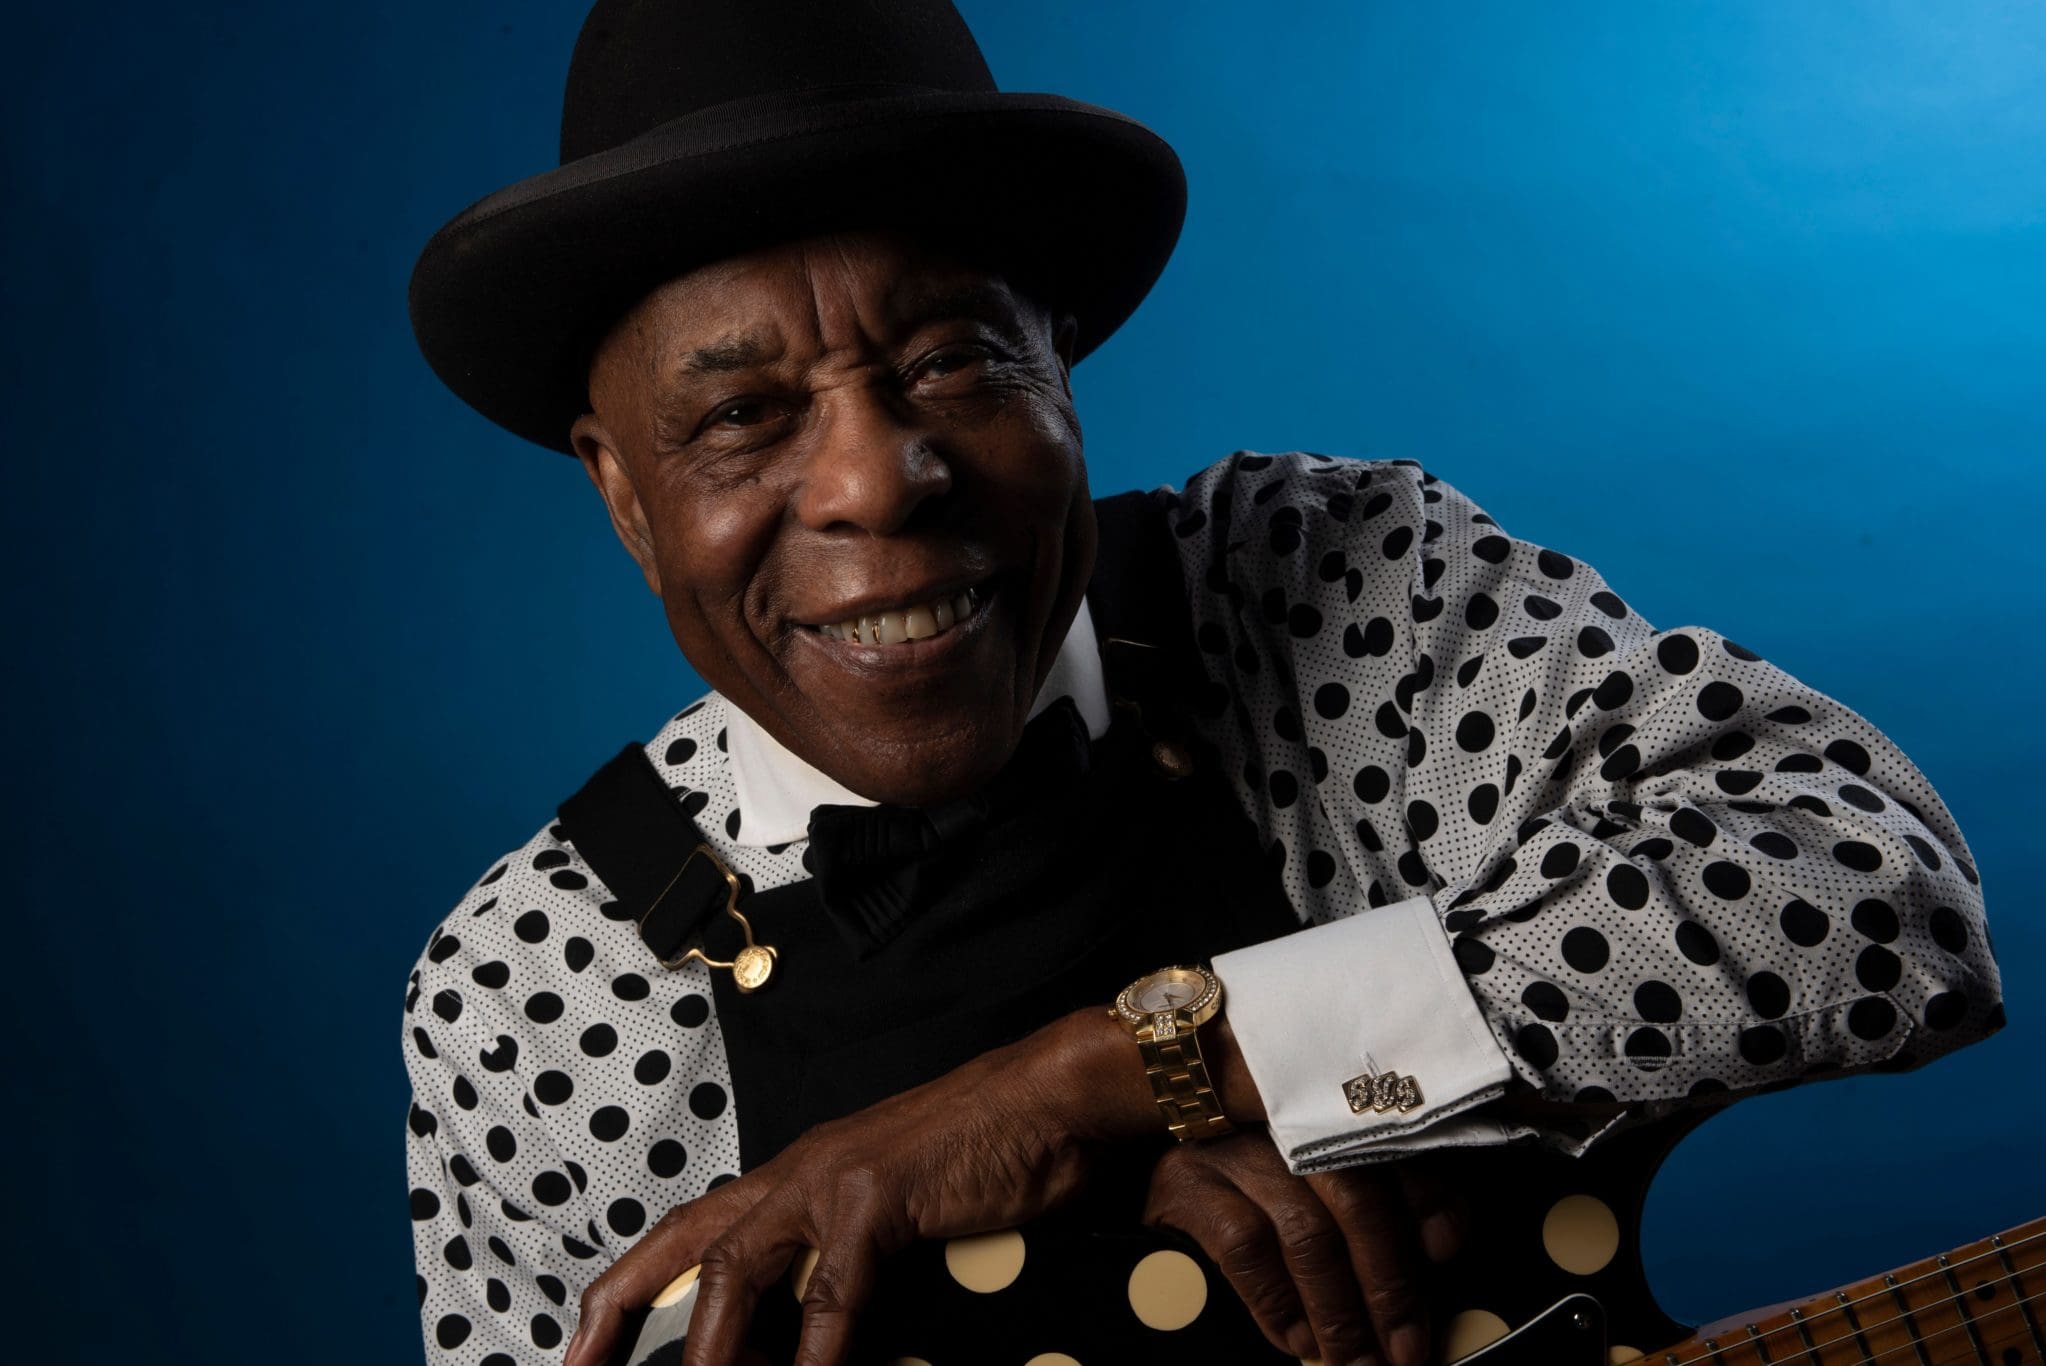 Buddy Guy with special guest Christone "Kingfish" Ingram Danny